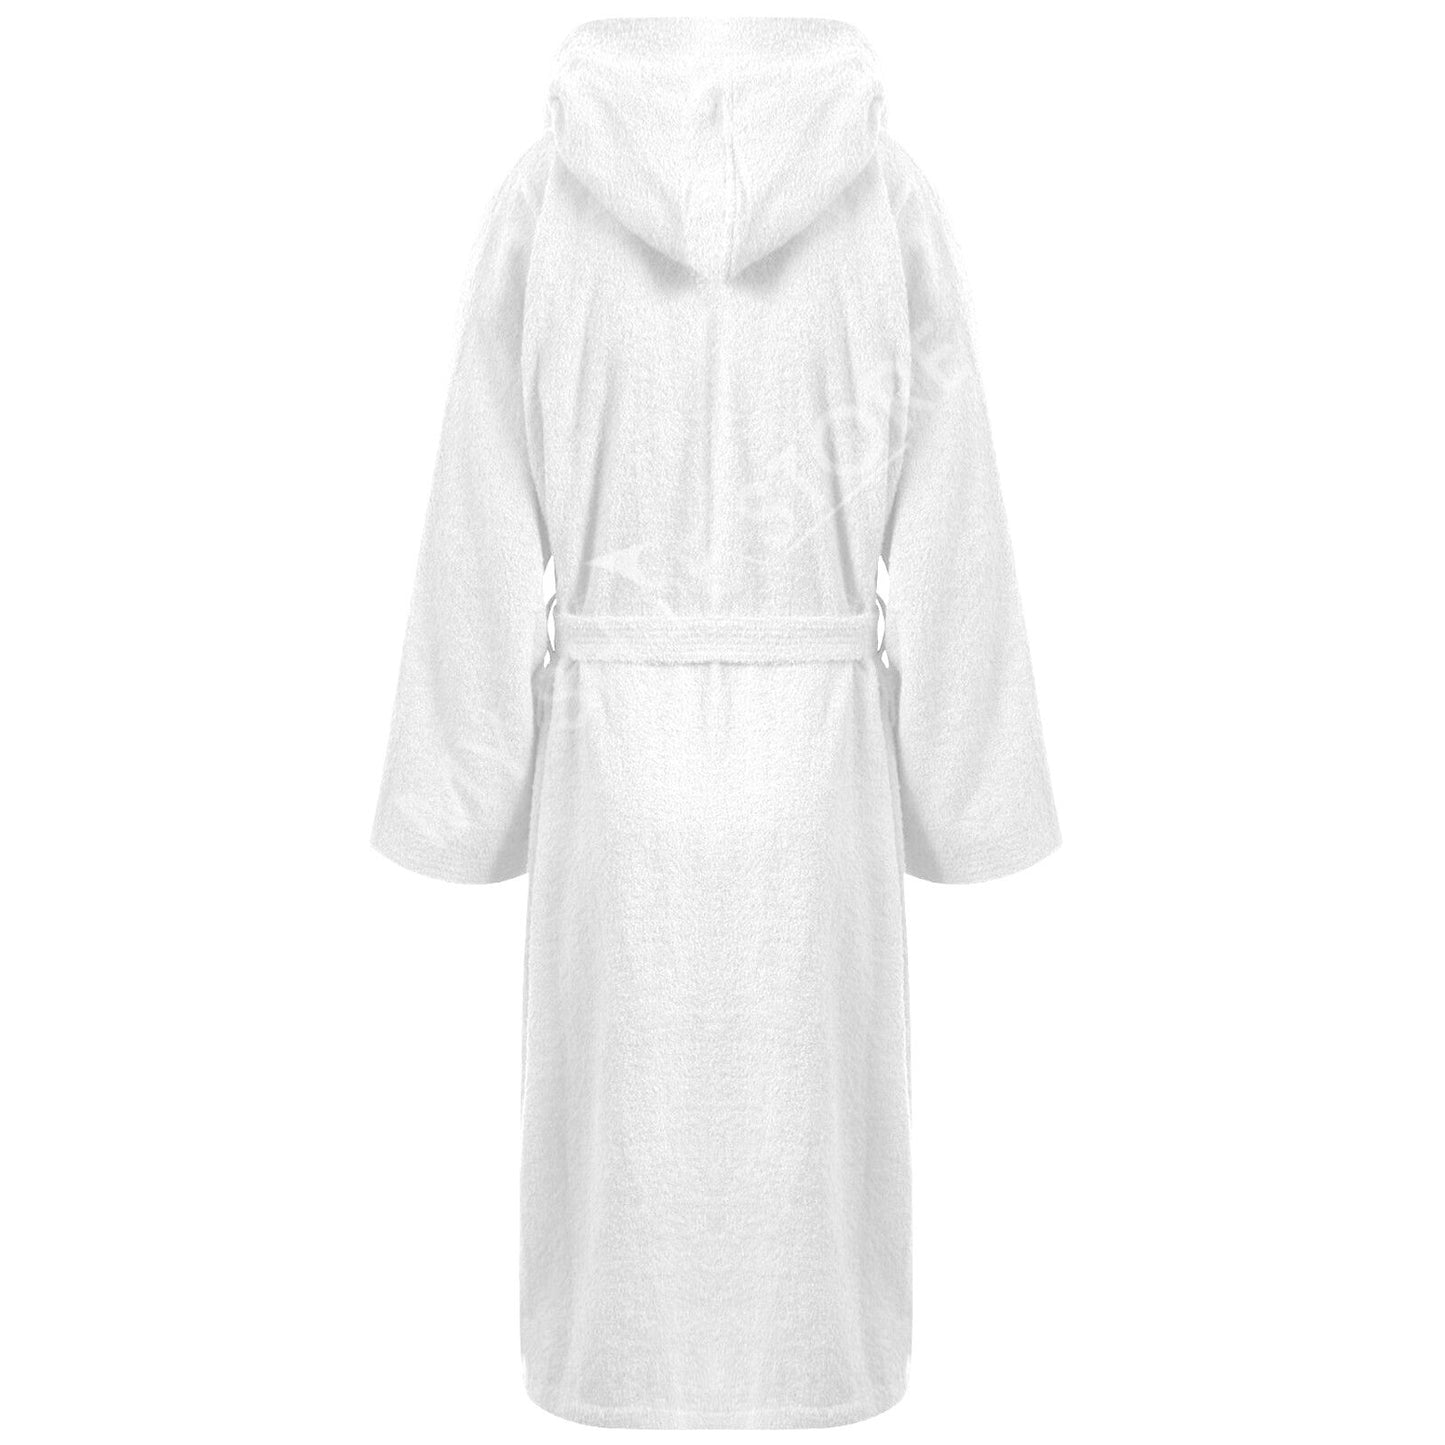 UNISEX LUXURY EGYPTIAN COTTON TERRY TOWELLING BATH ROBE DRESSING GOWN TOWEL SOFT